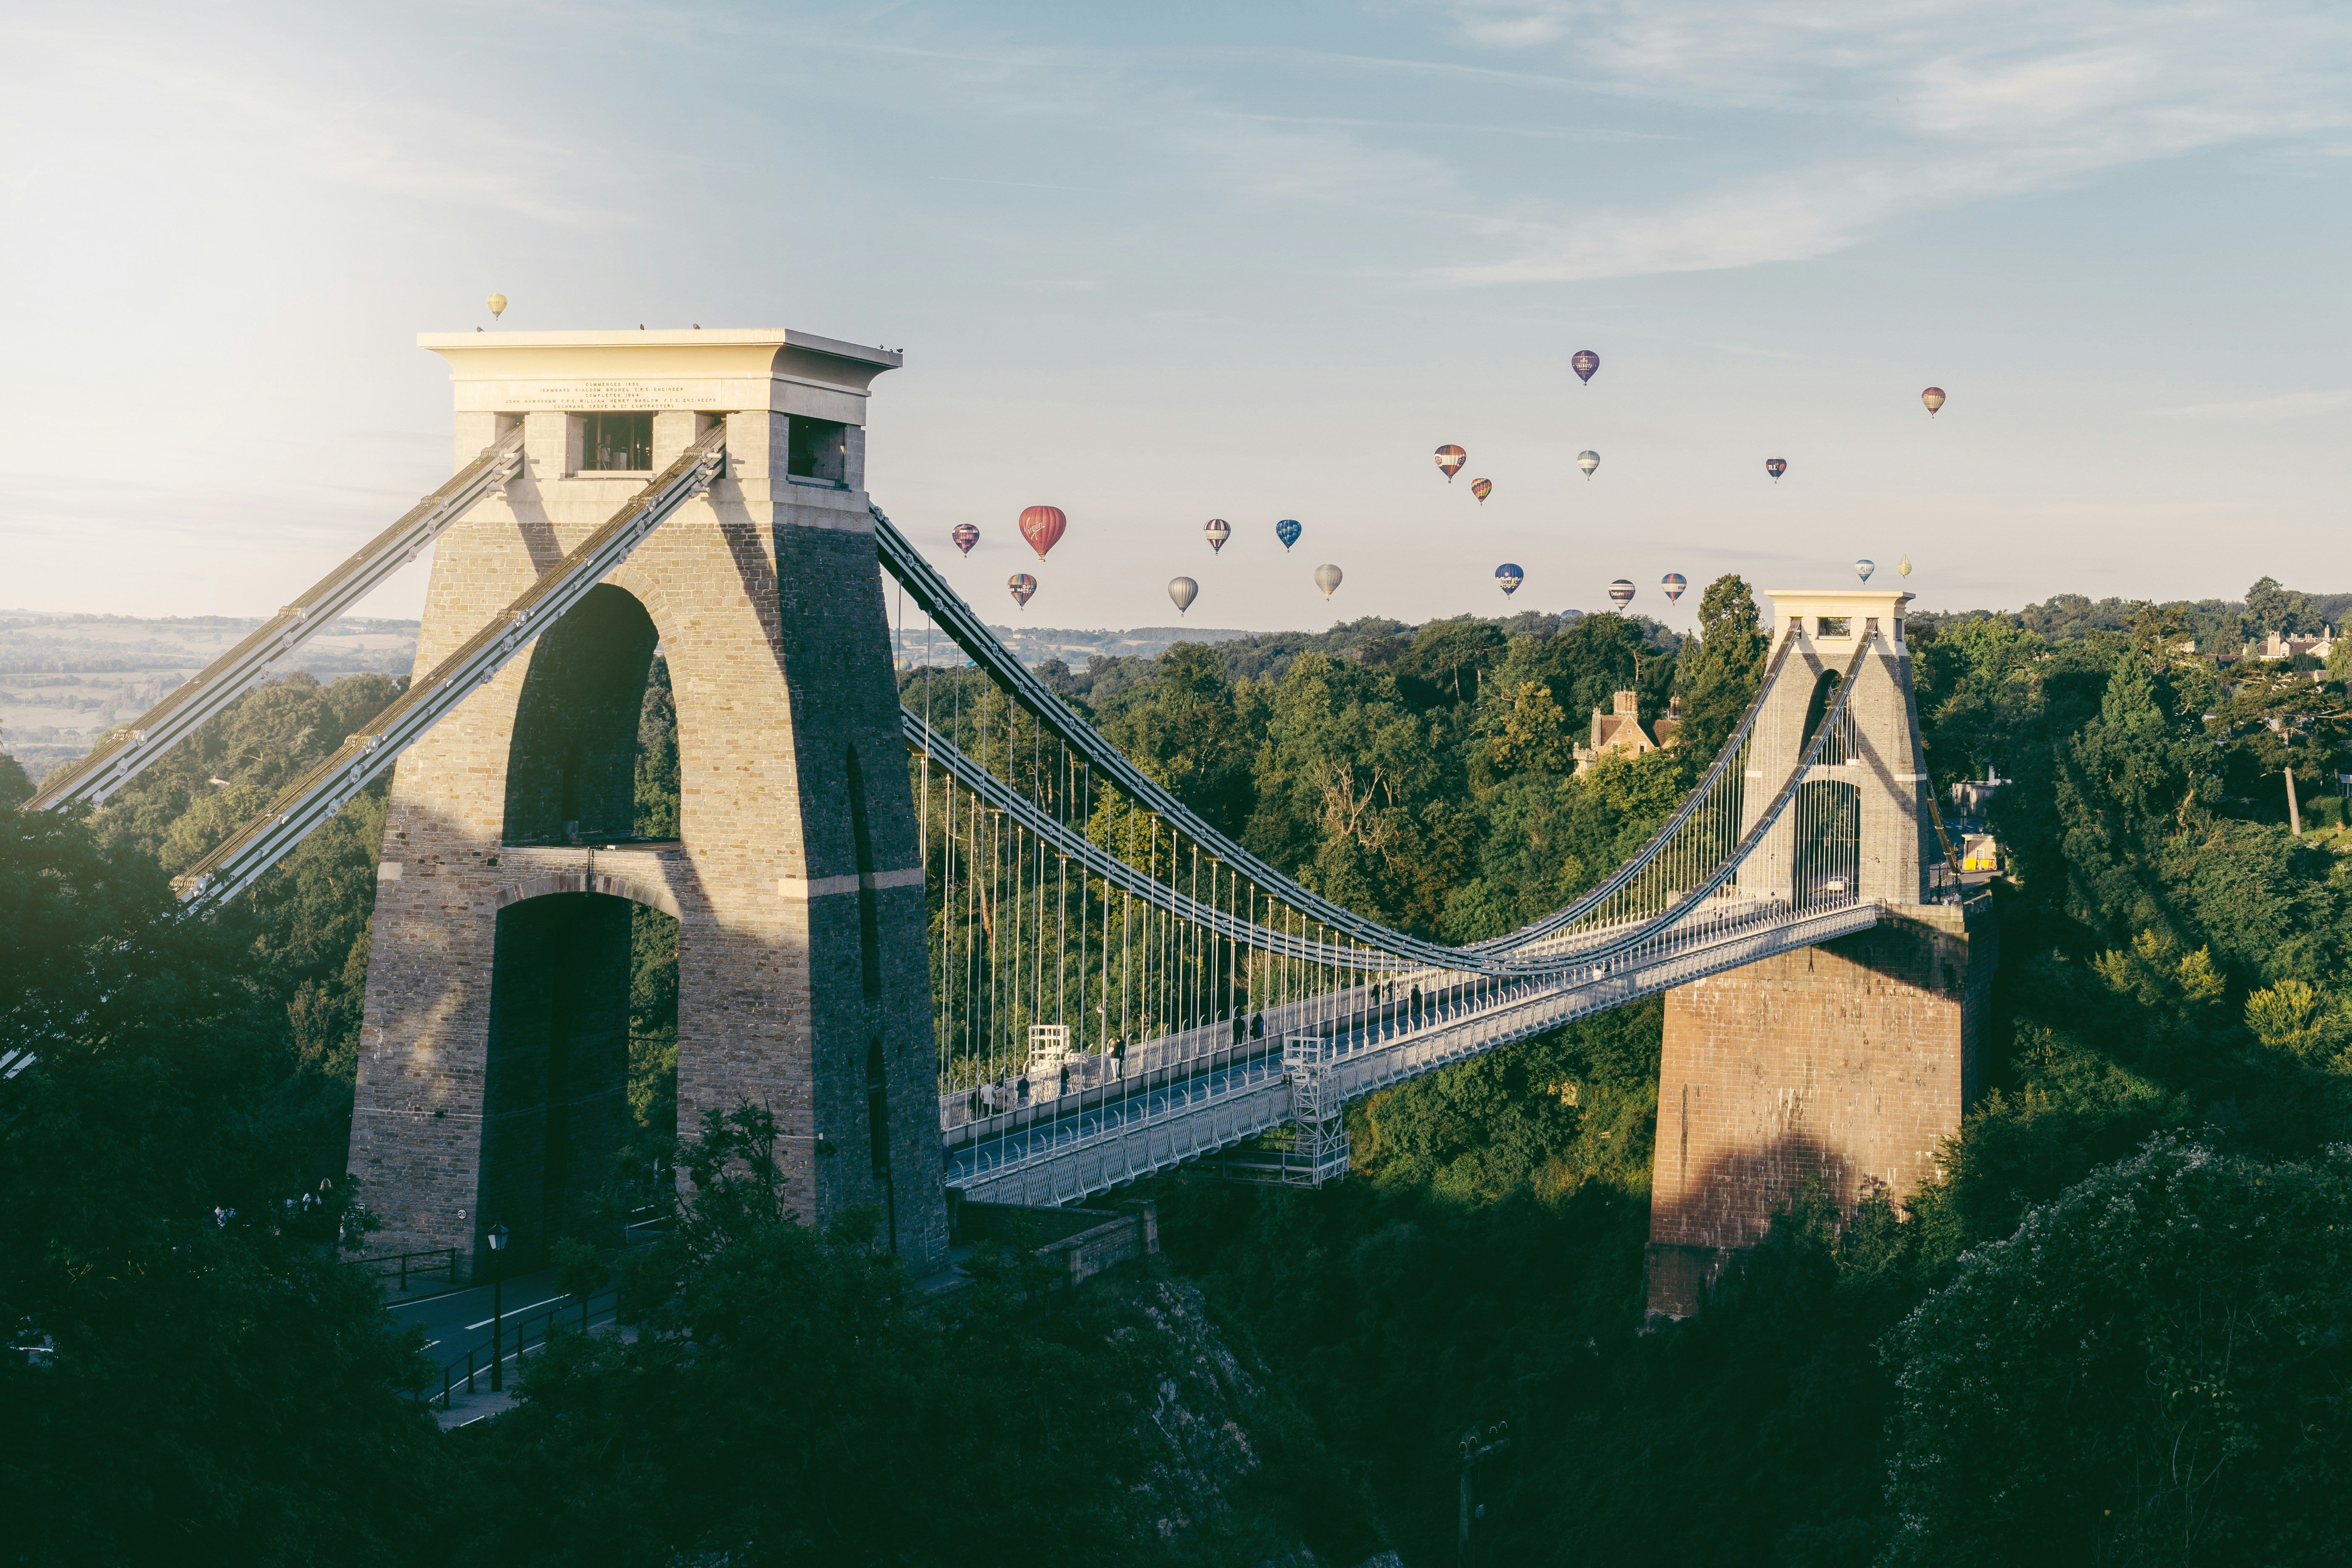 Ascend at sunrise to see the sky light up over the Clifton Suspension Bridge